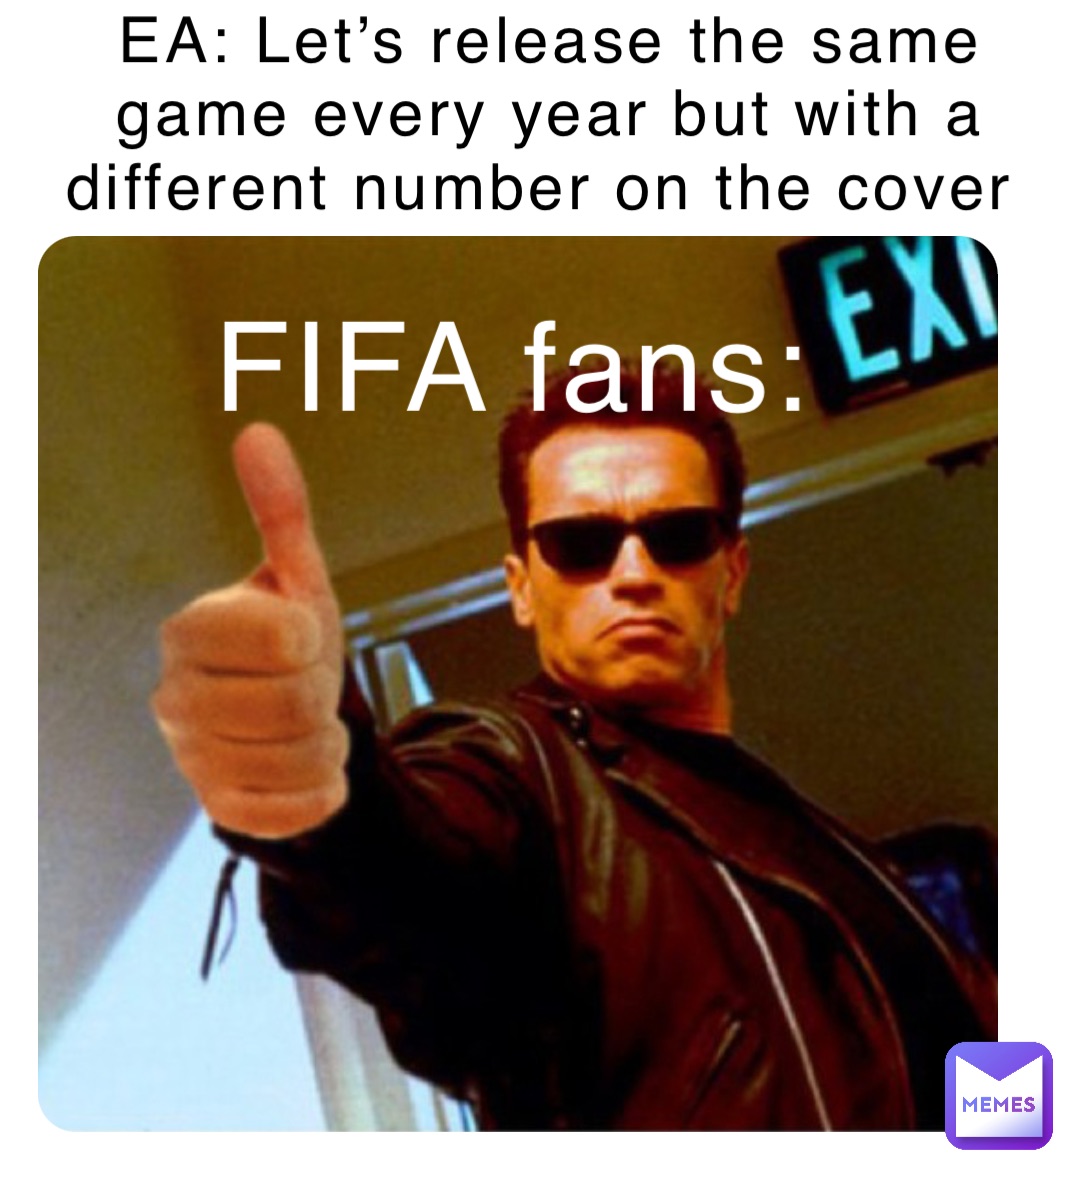 EA: Let’s release the same game every year but with a different number on the cover FIFA fans: